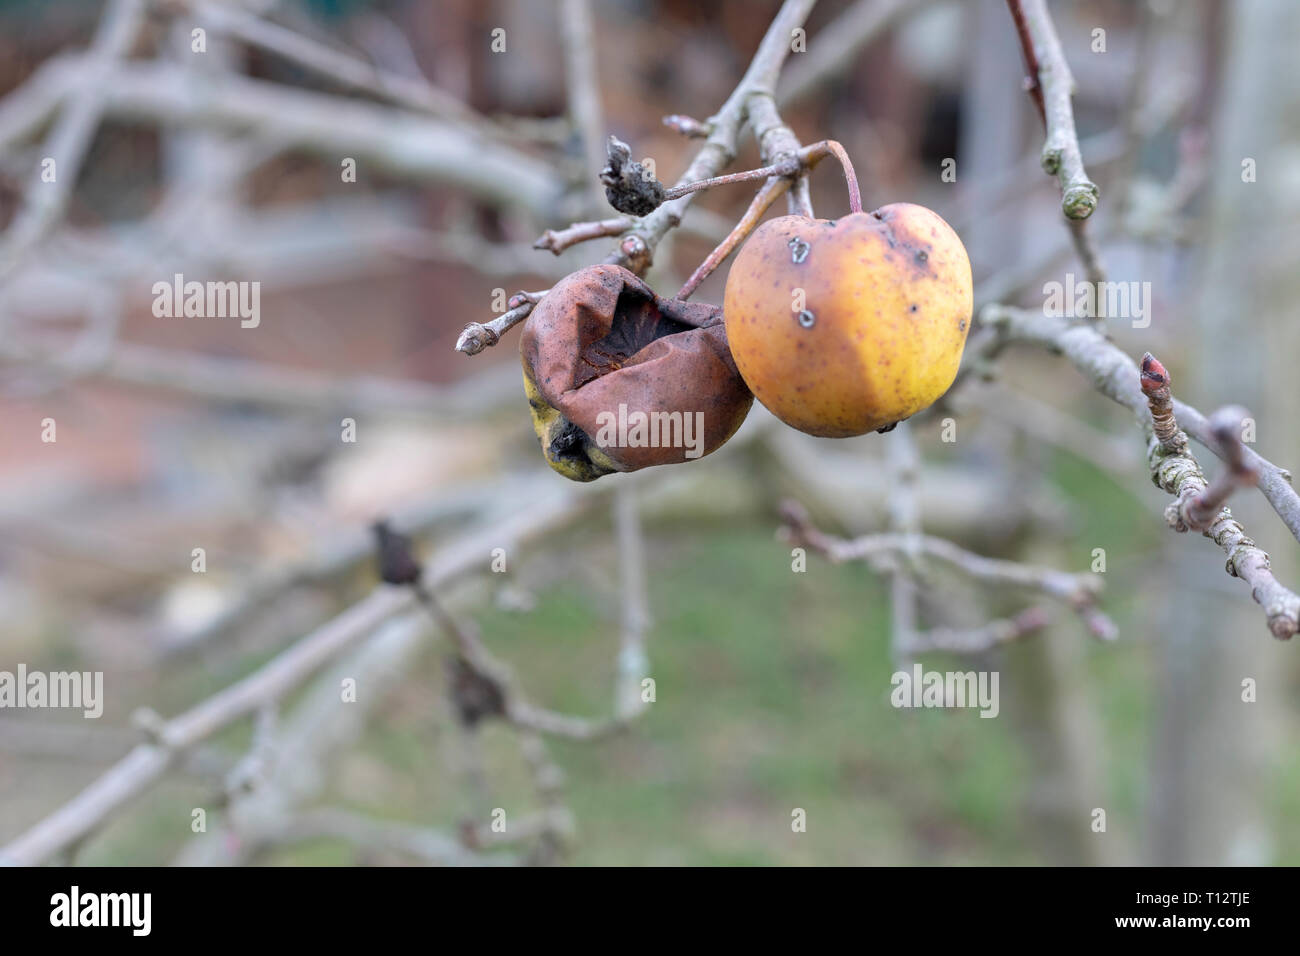 Plant diseases. Monilinia fructigena. Infected apples grow in the tree branch with typical signs of disease Stock Photo